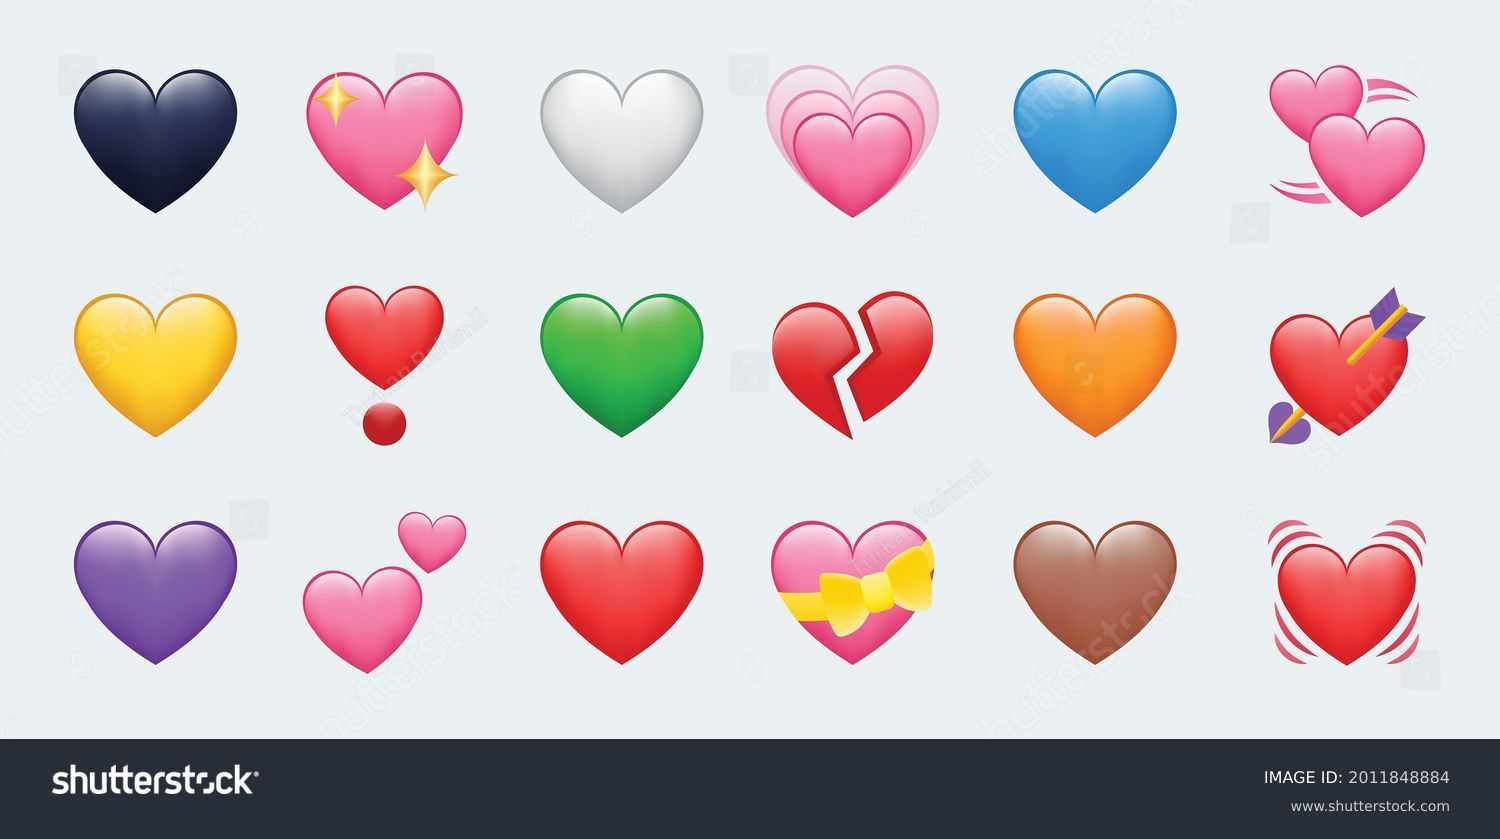 Heart Color Set Icons vector illustrations. Set of Hearts in different colors and types #2011848884